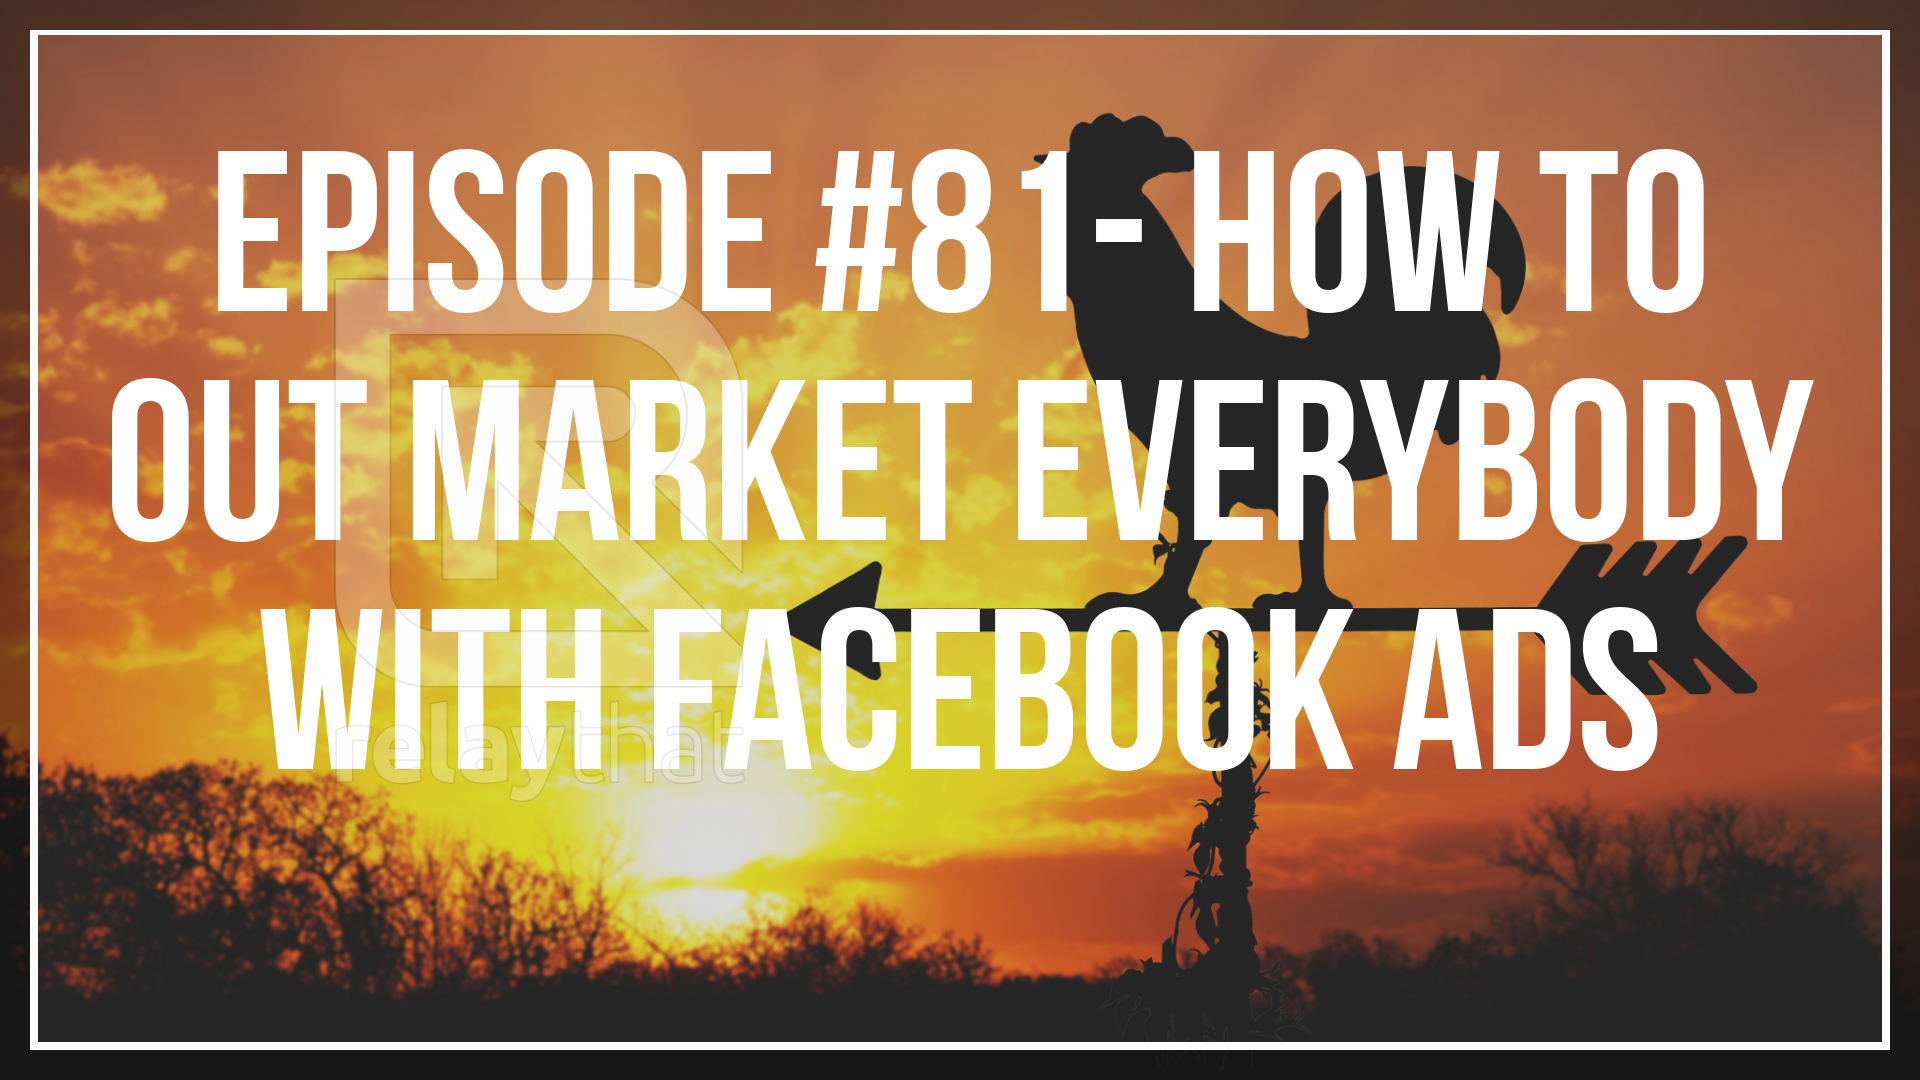 Episode #81 - How to out market everybody with Facebook ads